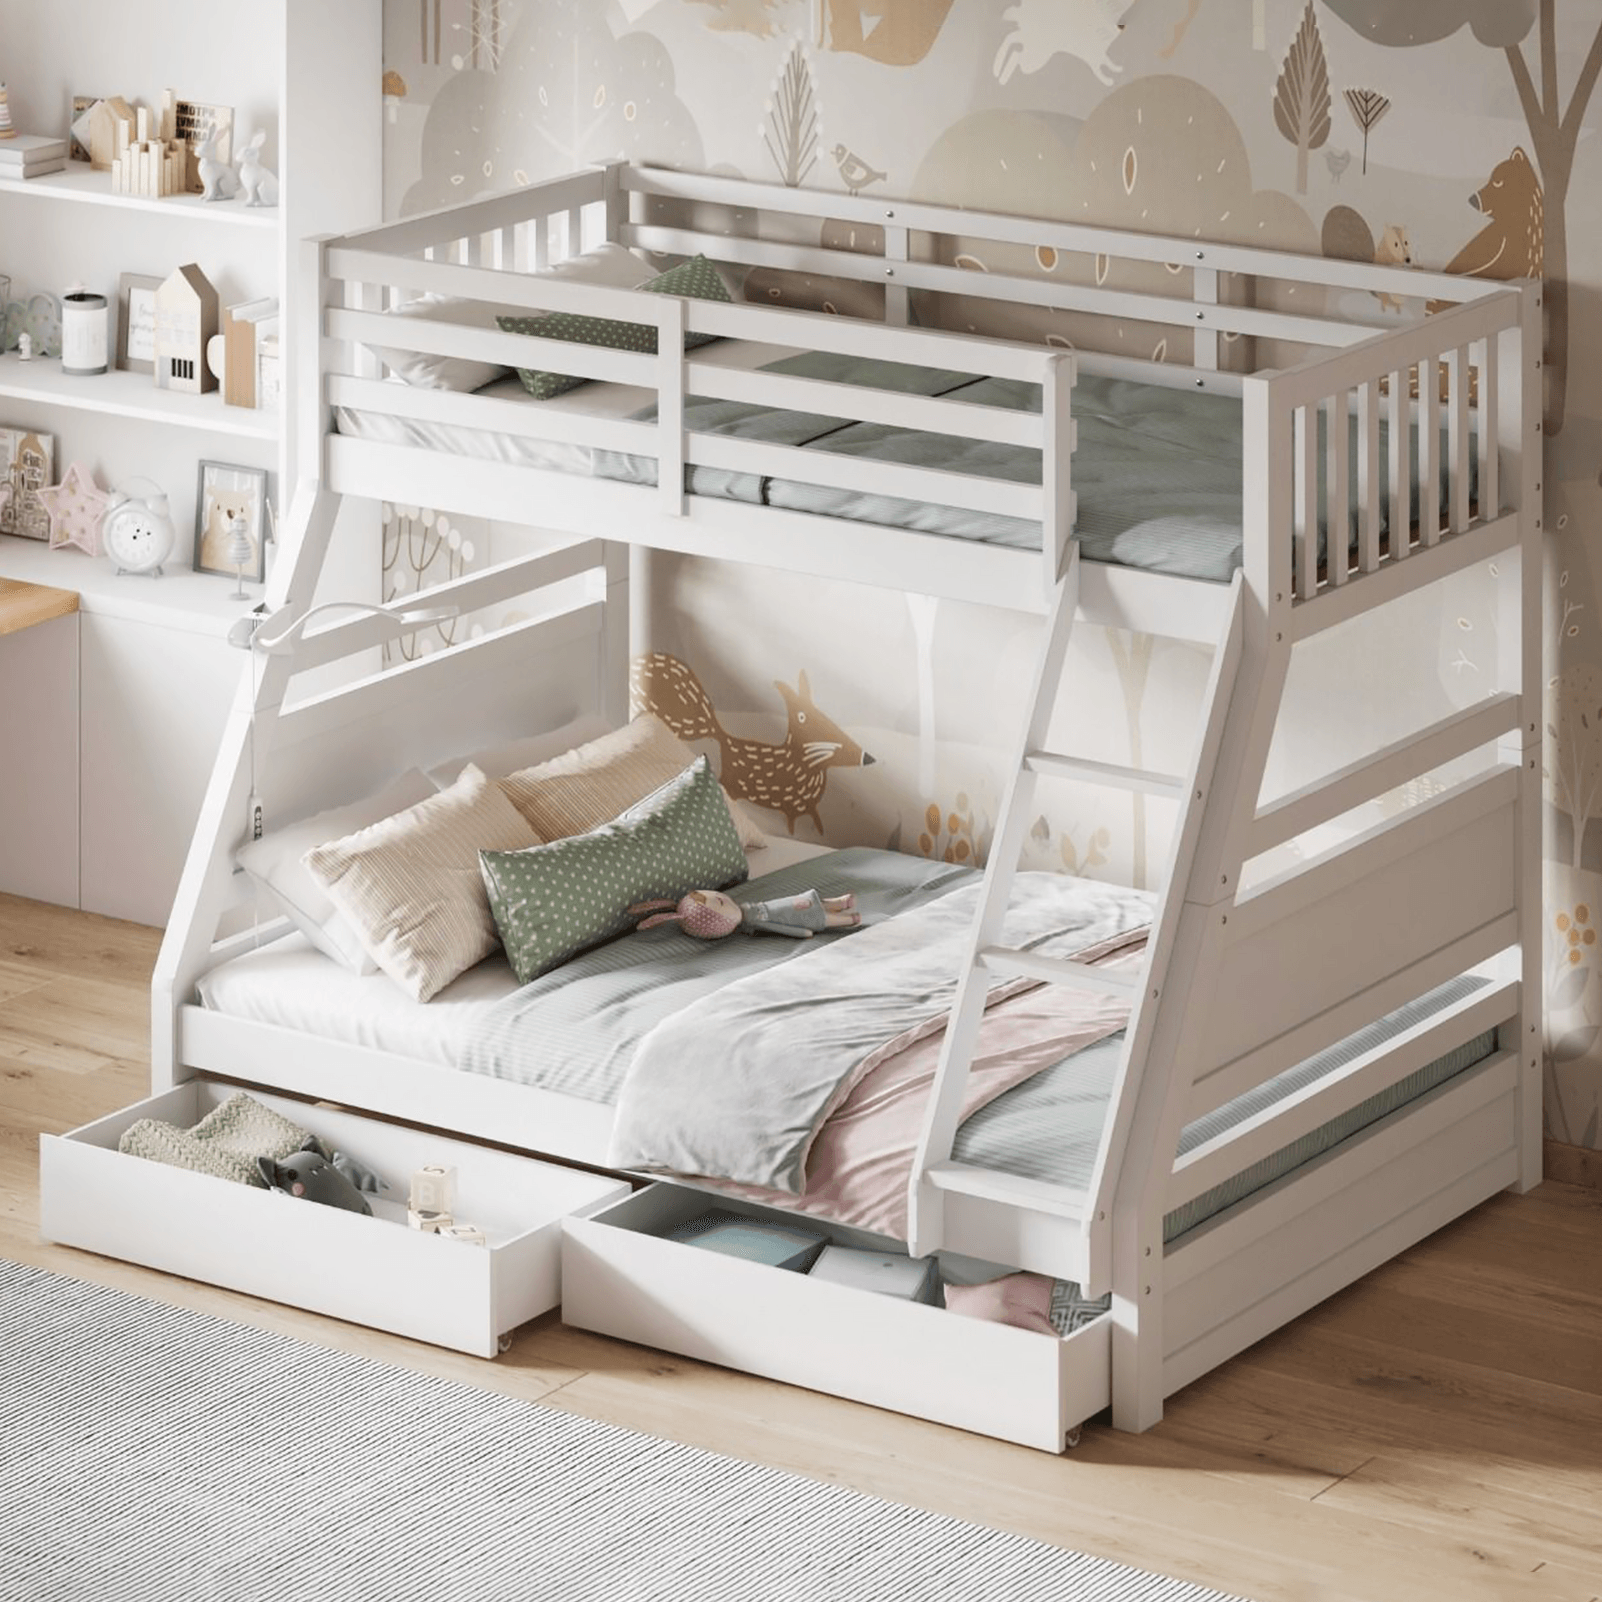 Ollie Triple Wood Bunk Bed Frame Draws White